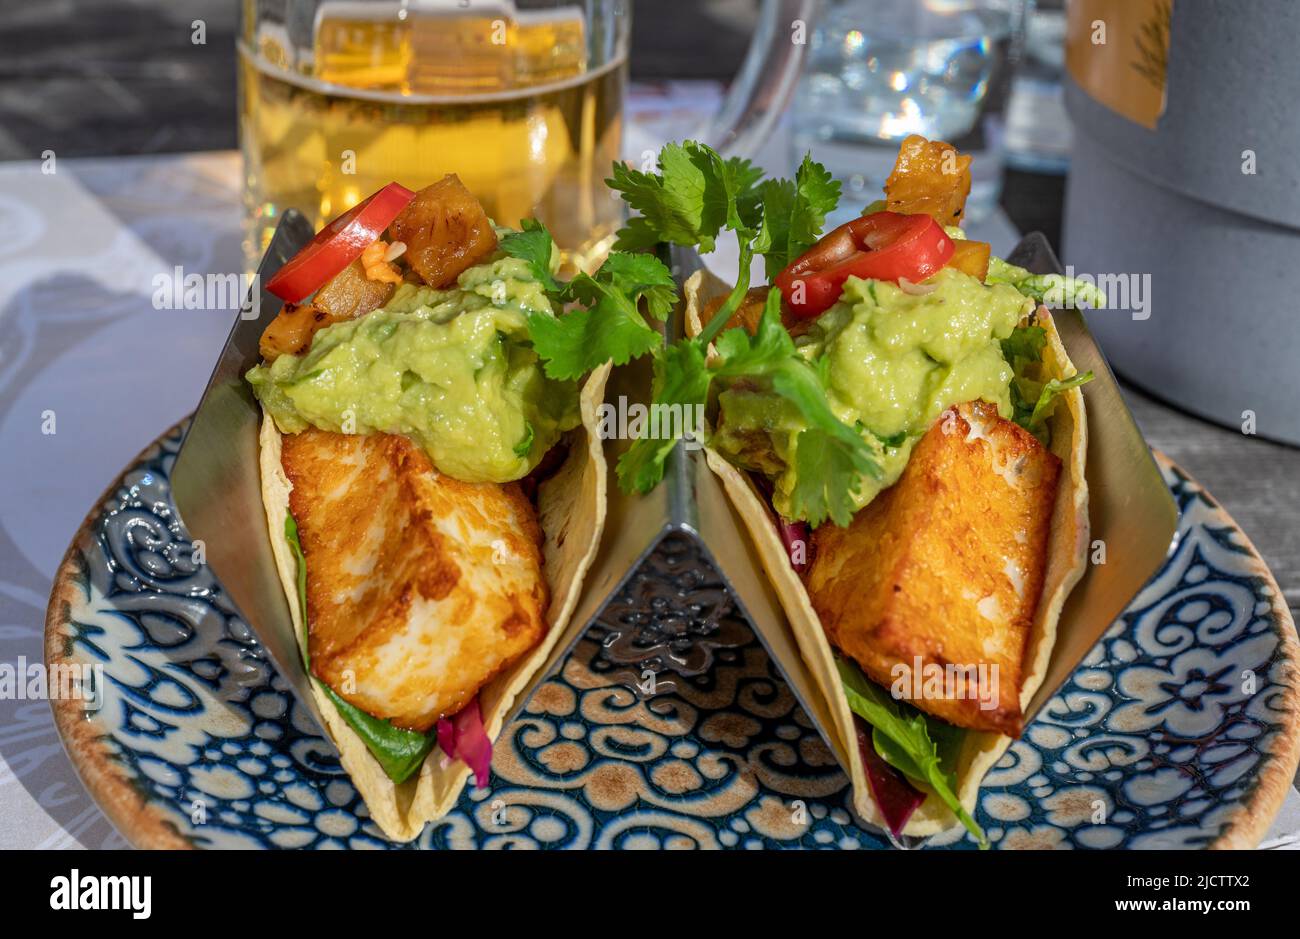 Tacos with deep fried halloumi served at a restaurant in Norrkoping Sweden Stock Photo